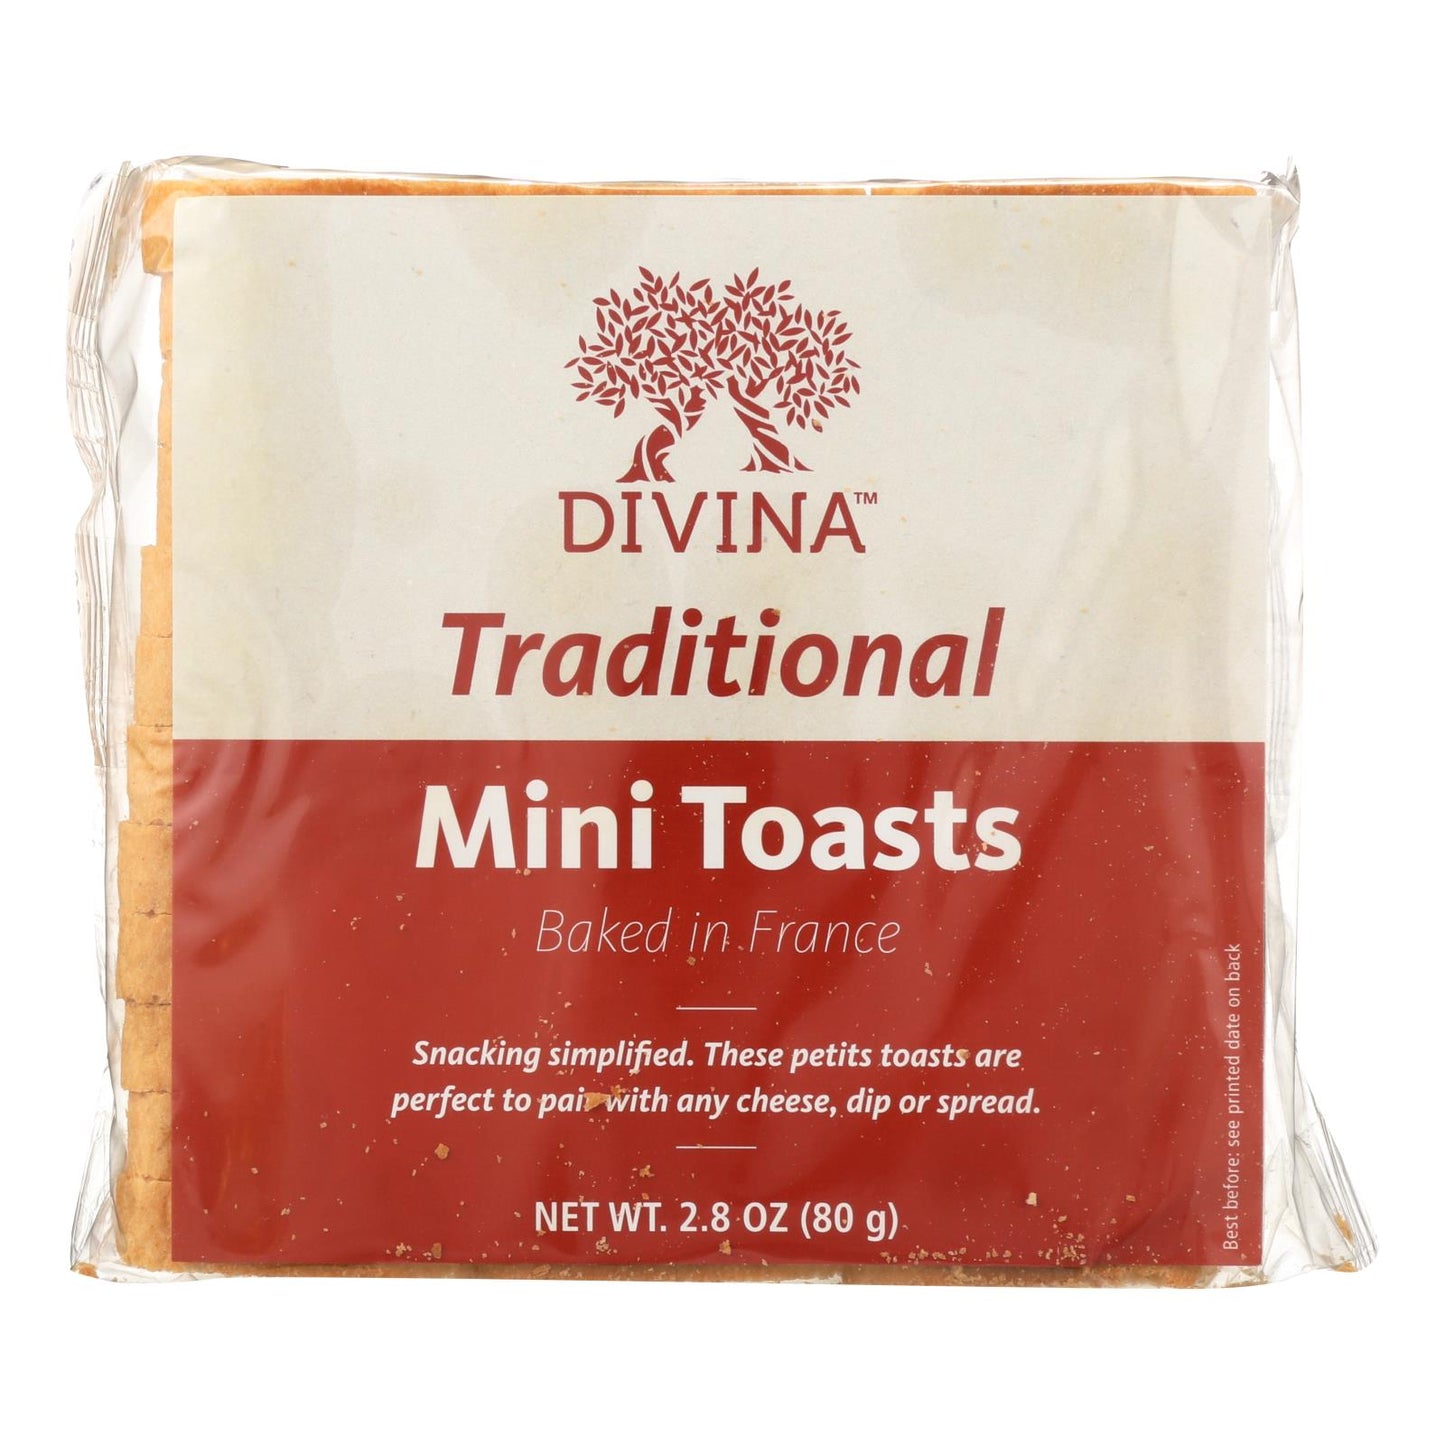 Divina - Traditional Mini Toasts - Case Of 24 - 2.8 Oz.